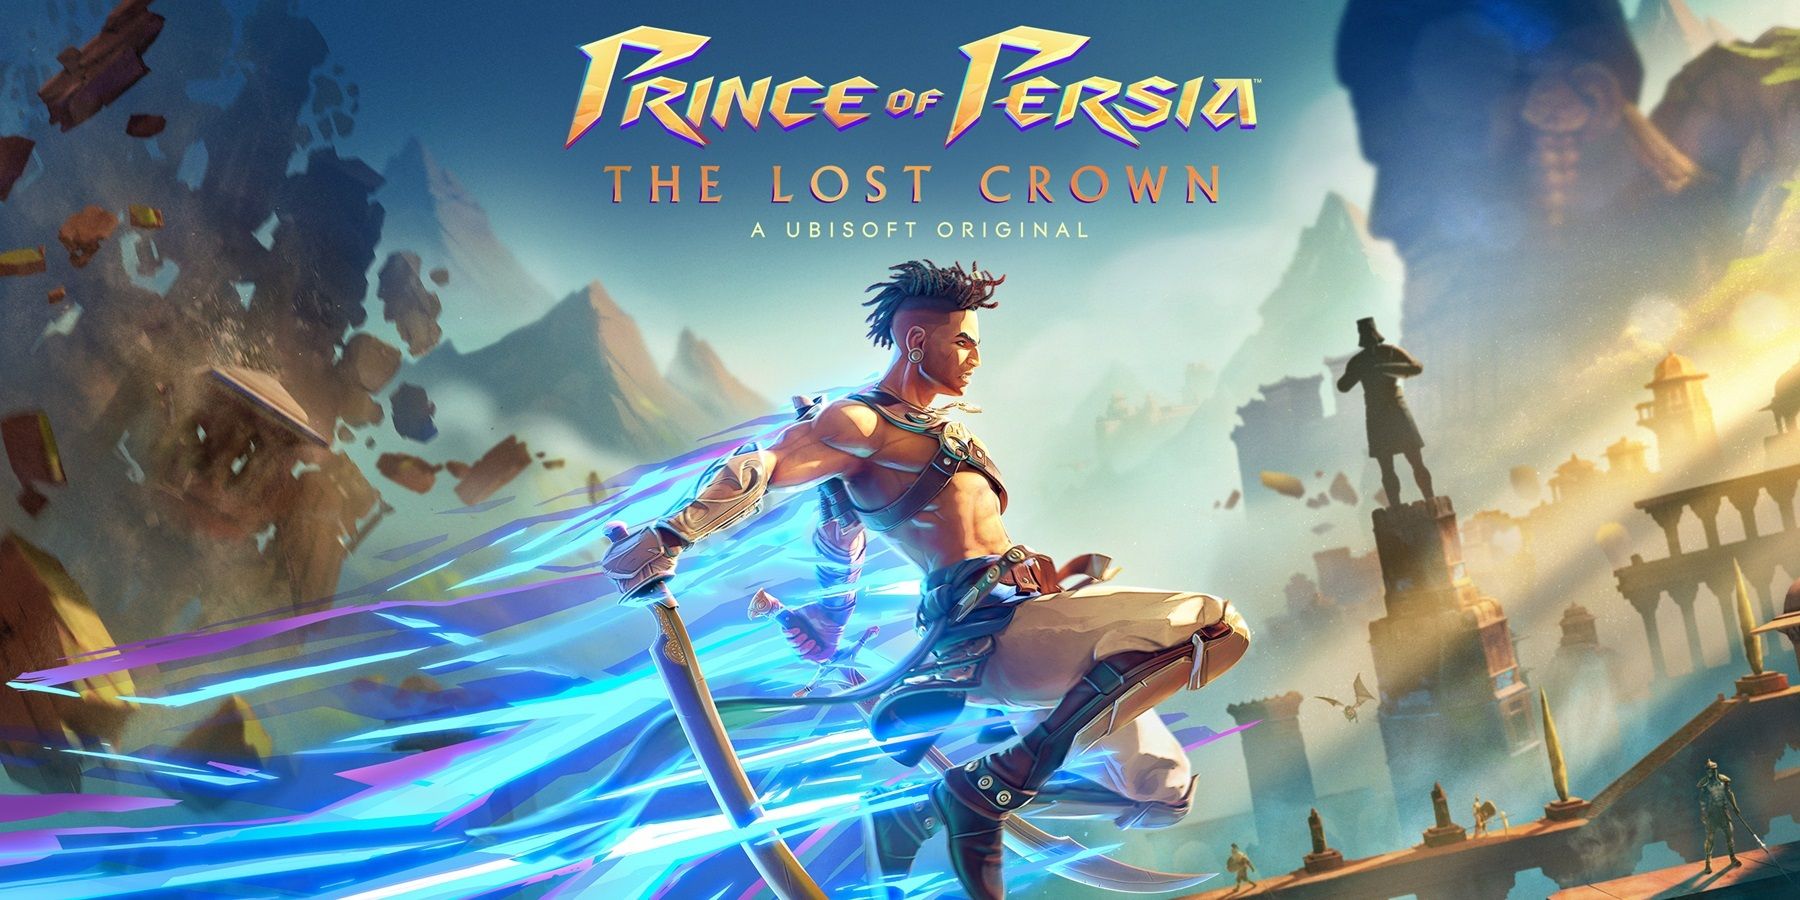 rumor-prince-of-persia-the-lost-crown-might-have-underperformed-in-sales